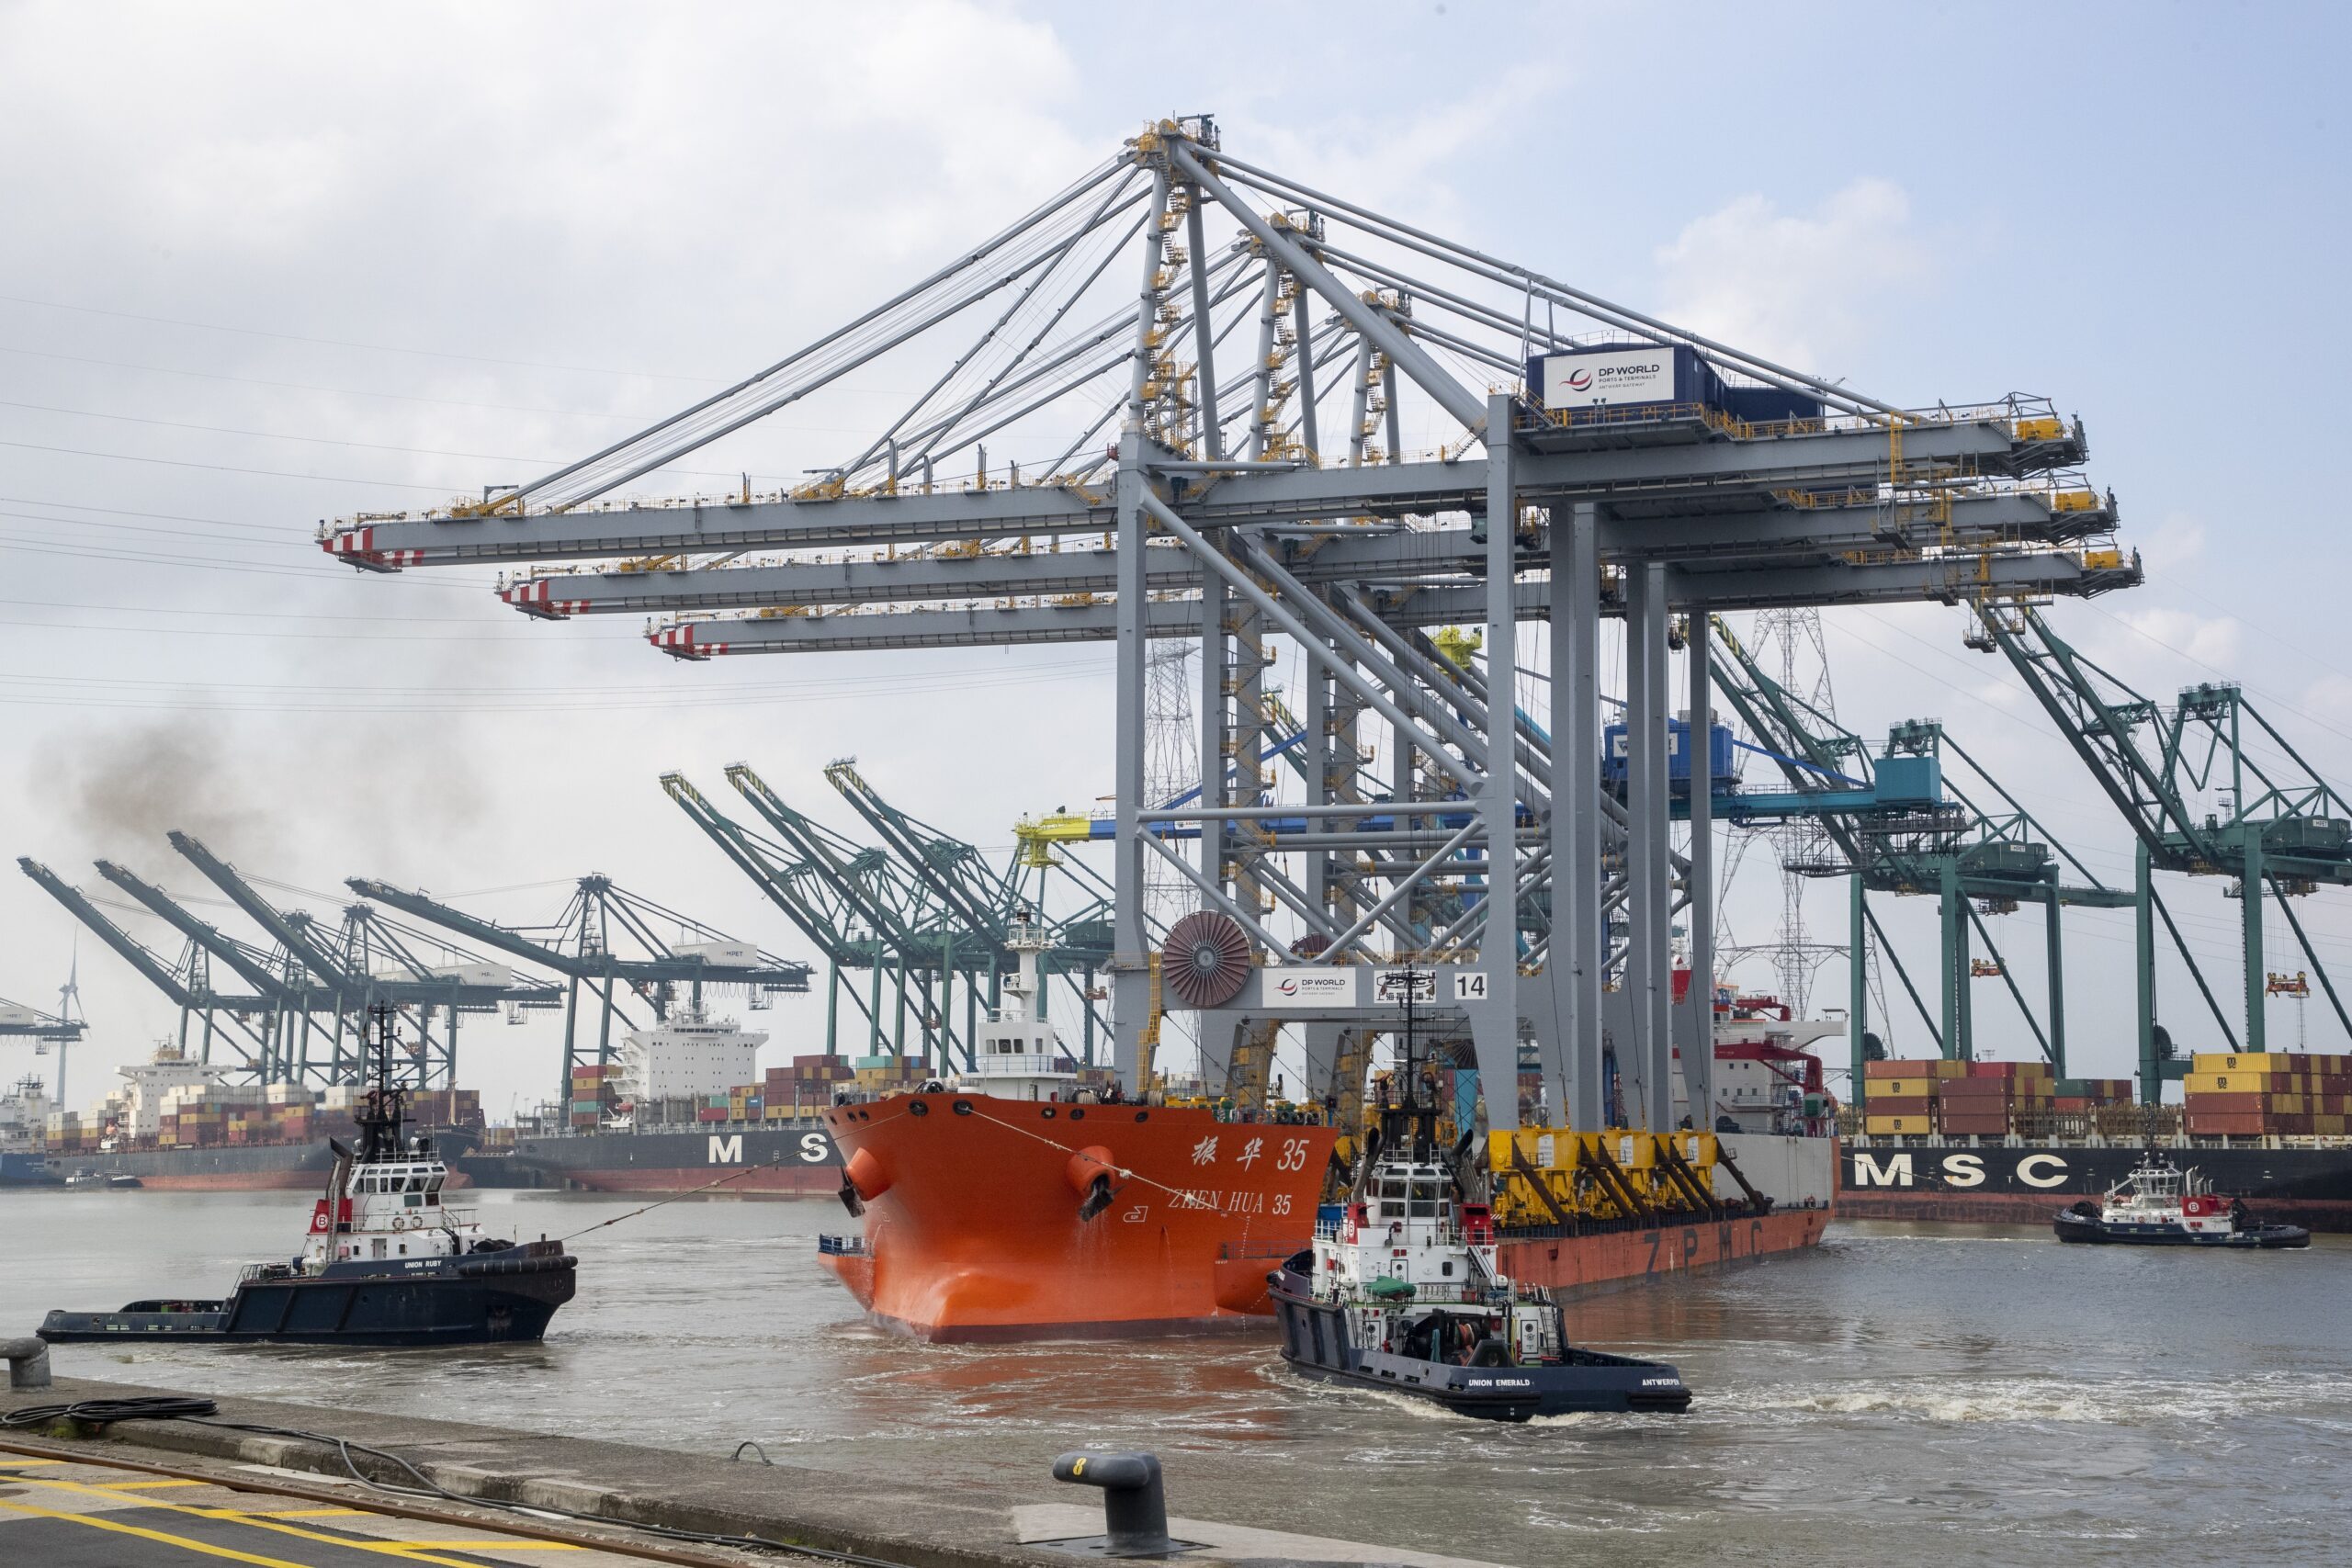 Three new ship-to-shore cranes, part of a $218m modernisation programme, arrive at DP World in Antwerp, Belgium